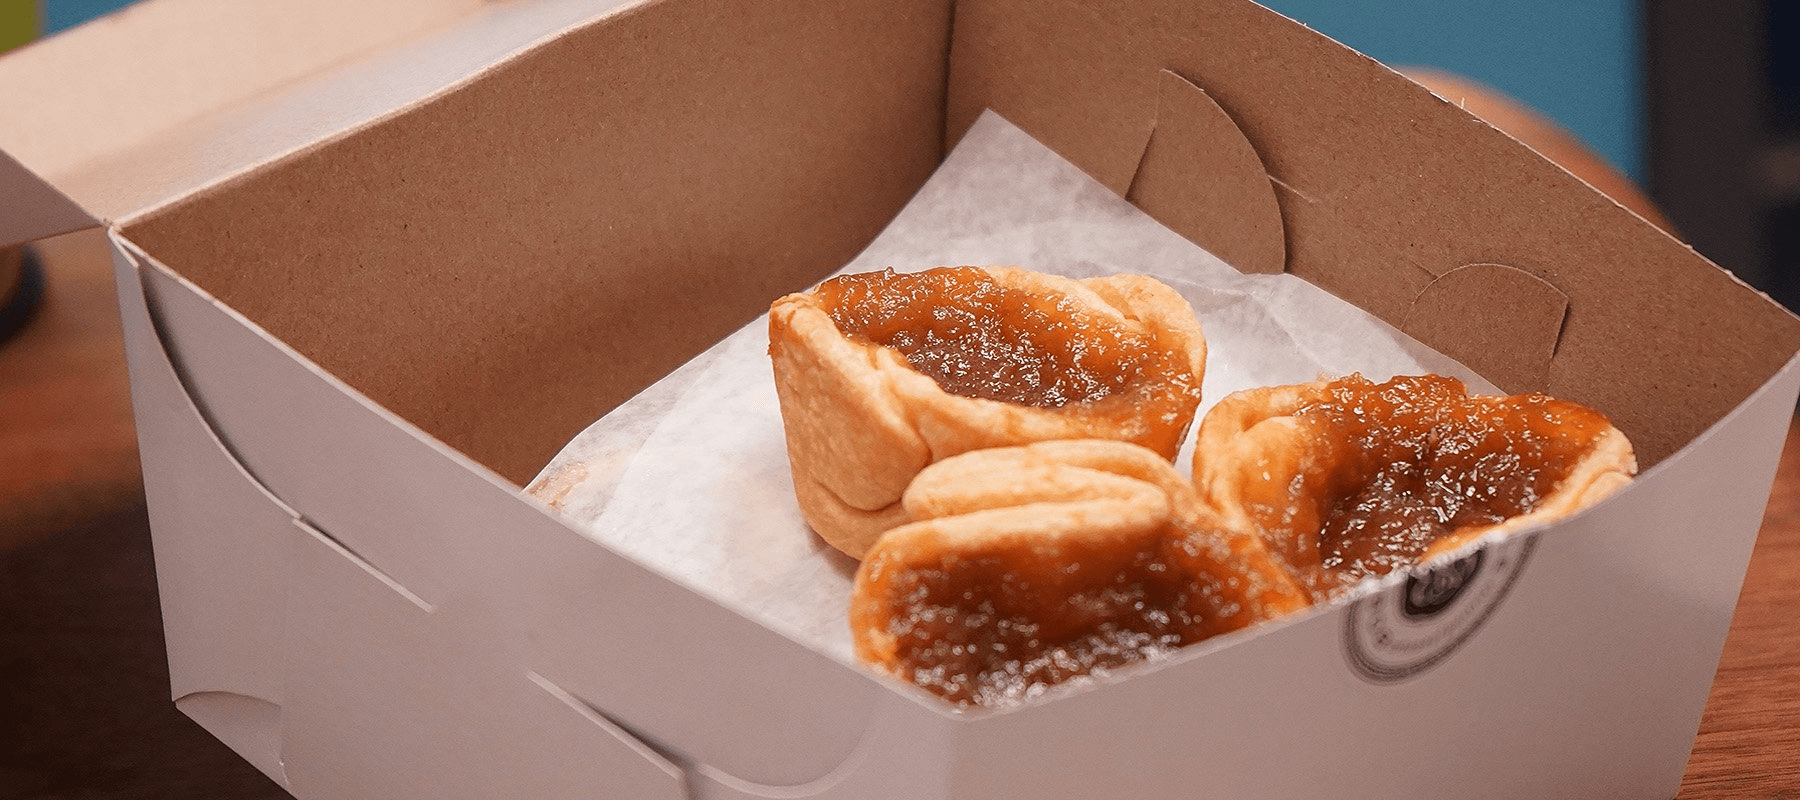 Buttery Treats from Sweet Pete! - Signa